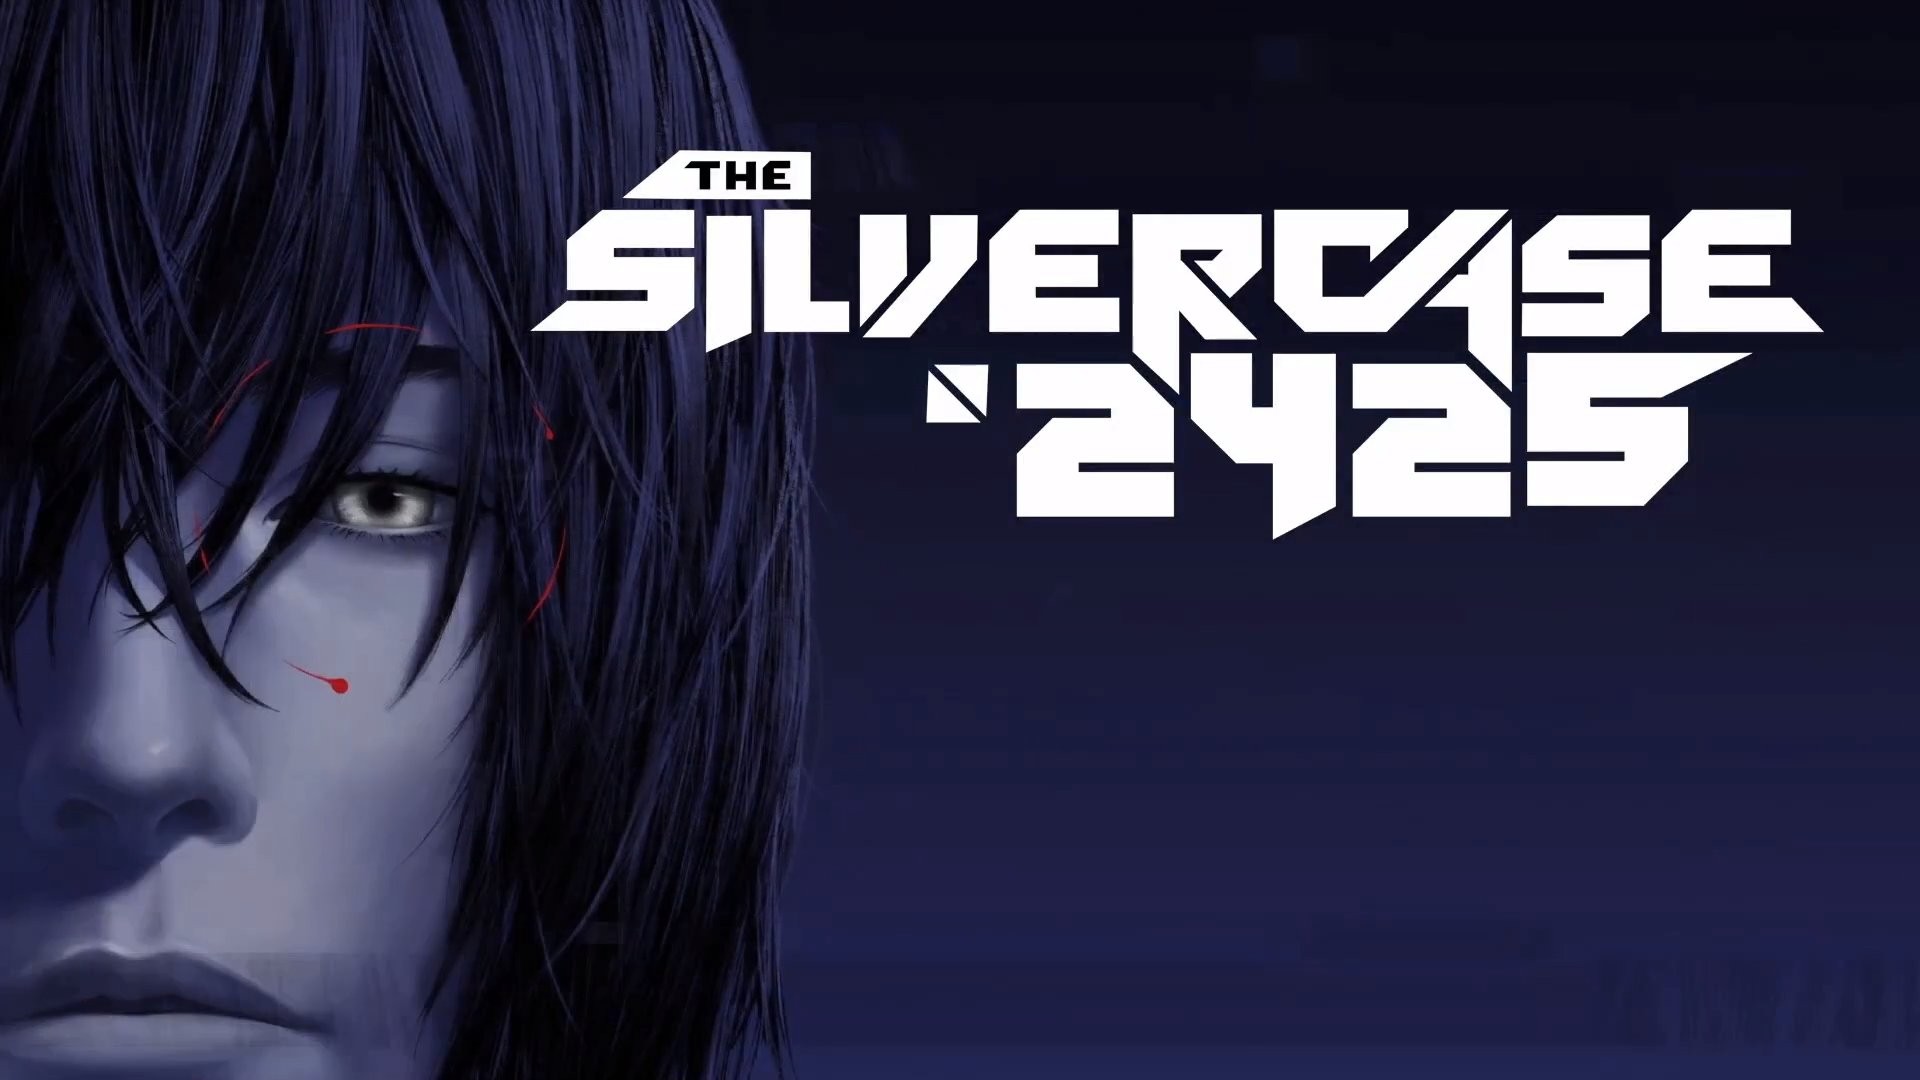 The Silver Case 2425 for Switch Heads West